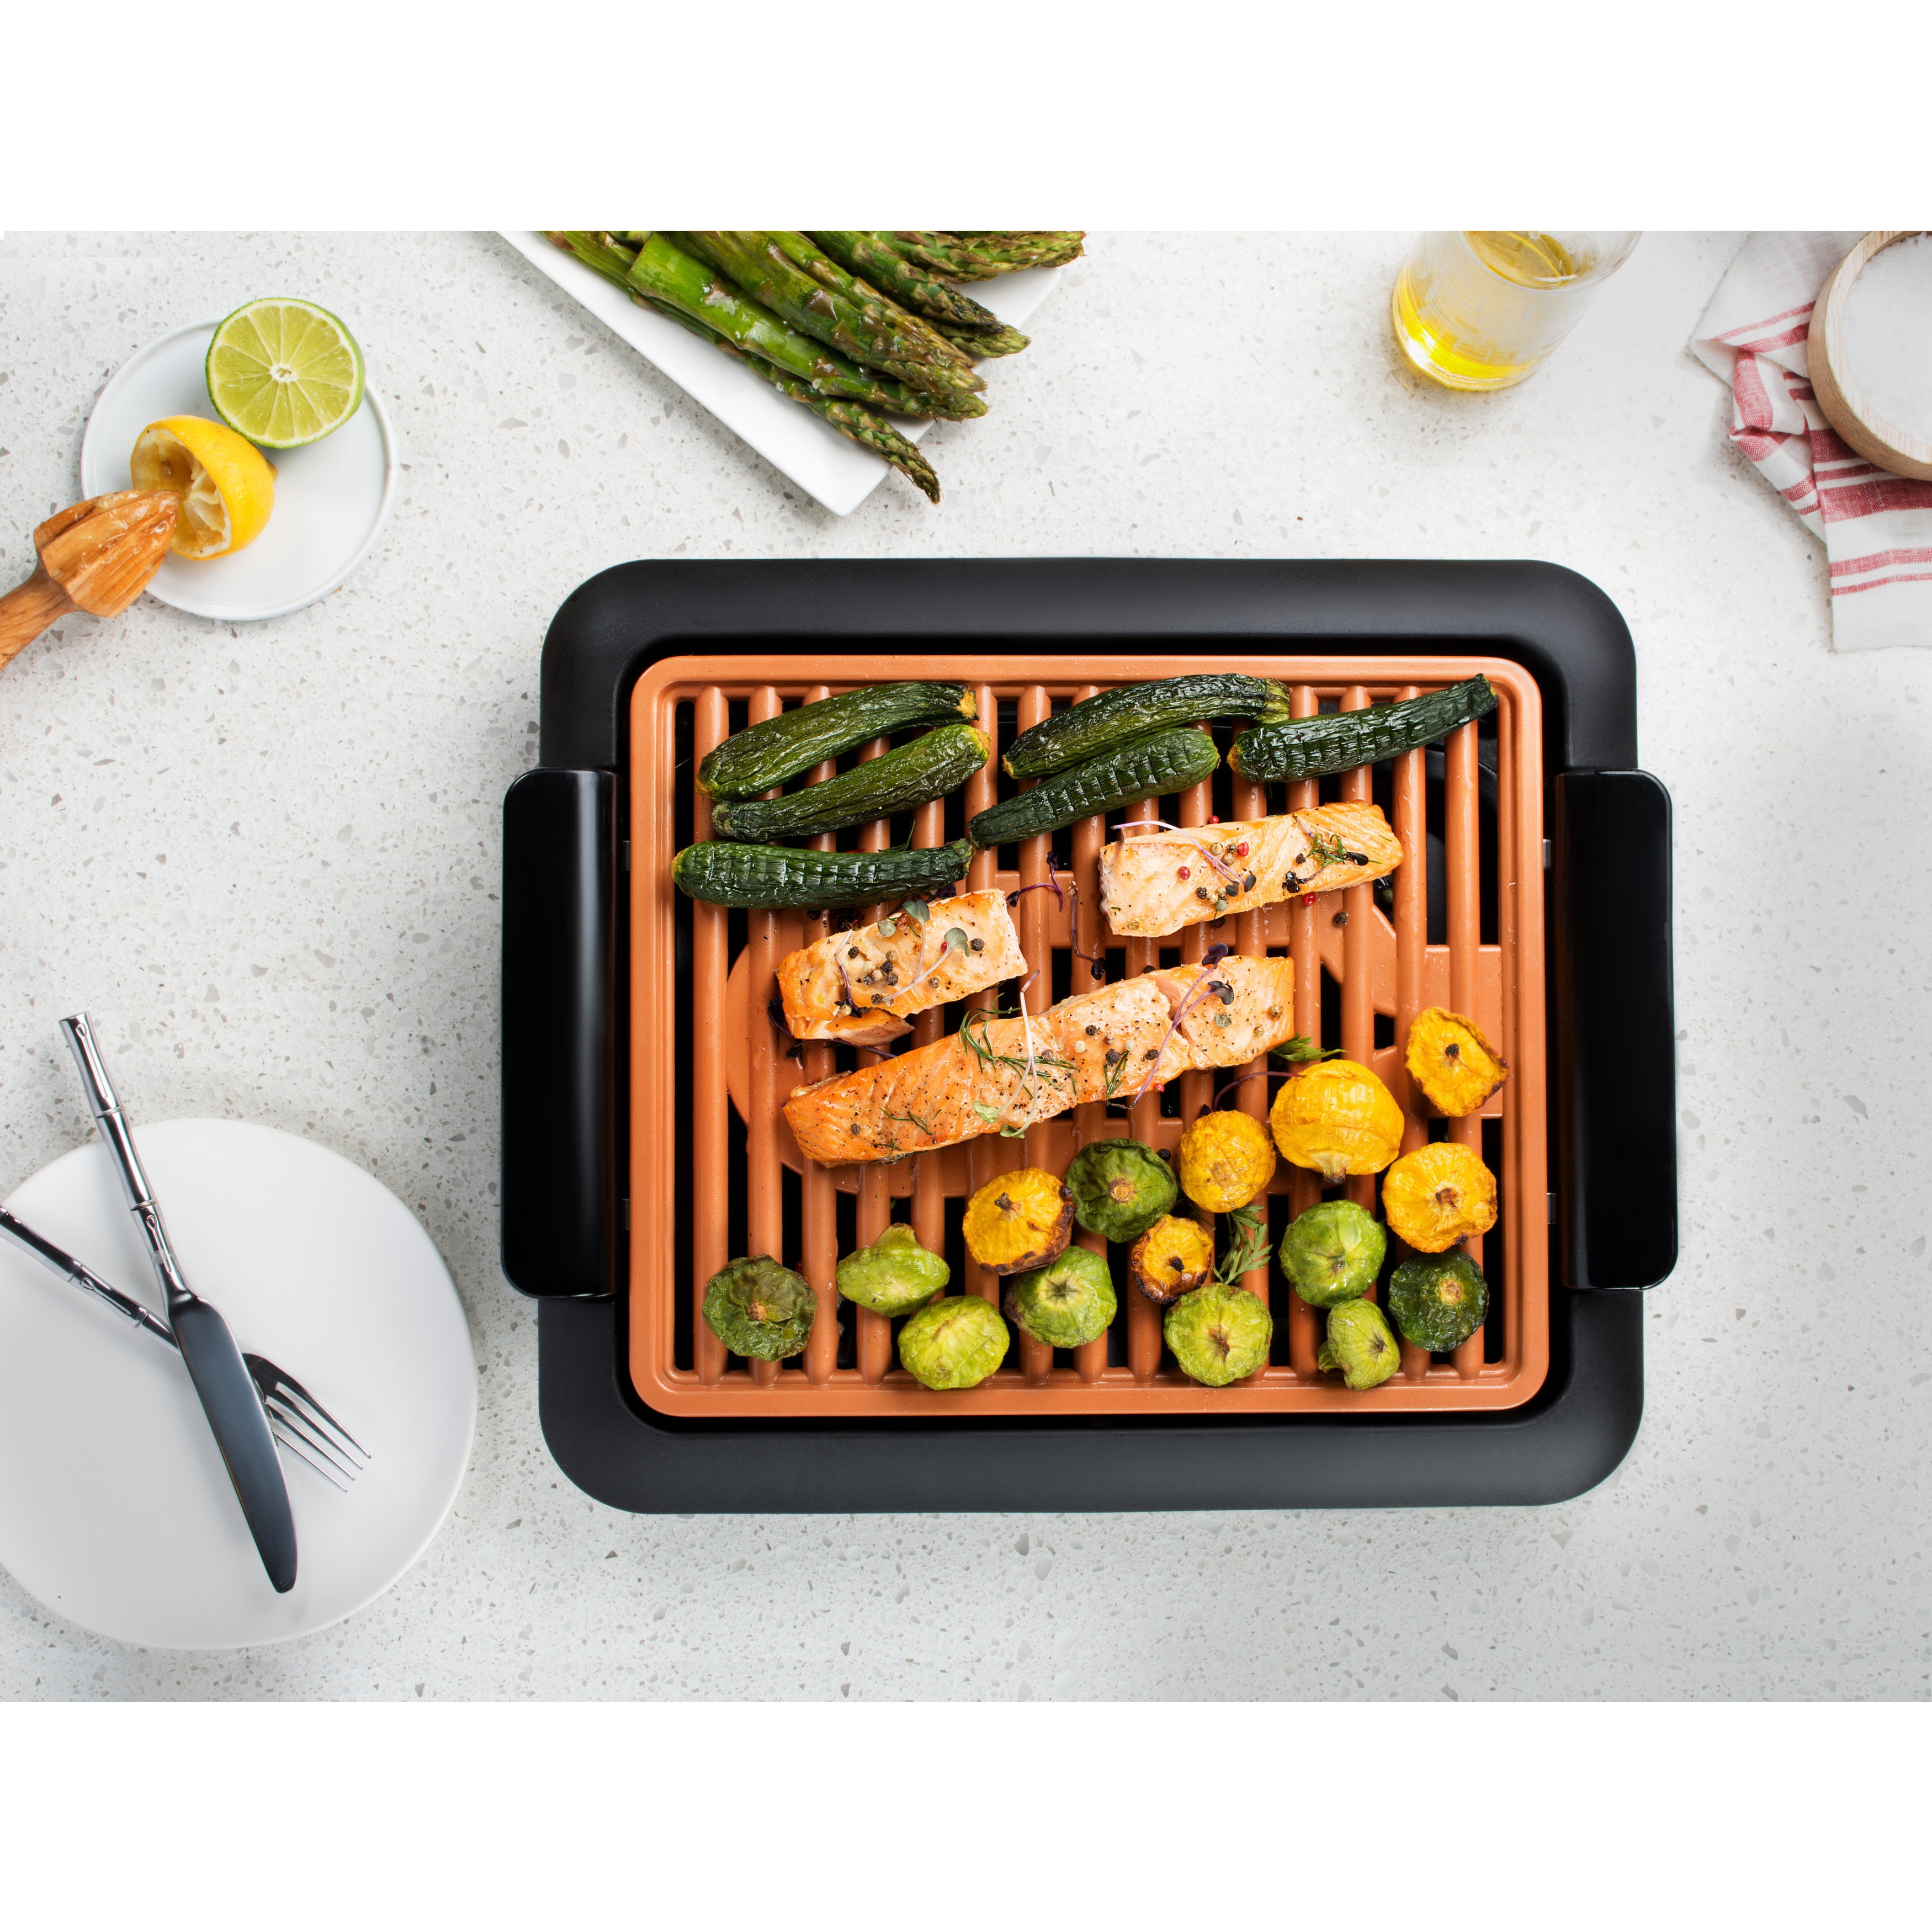 https://ak1.ostkcdn.com/images/products/17653184/Gotham-Steel-Copper-Non-stick-Indoor-Electric-Smokeless-Grill-9c764cea-0f9d-4280-9335-9bf9f99022ec.jpg